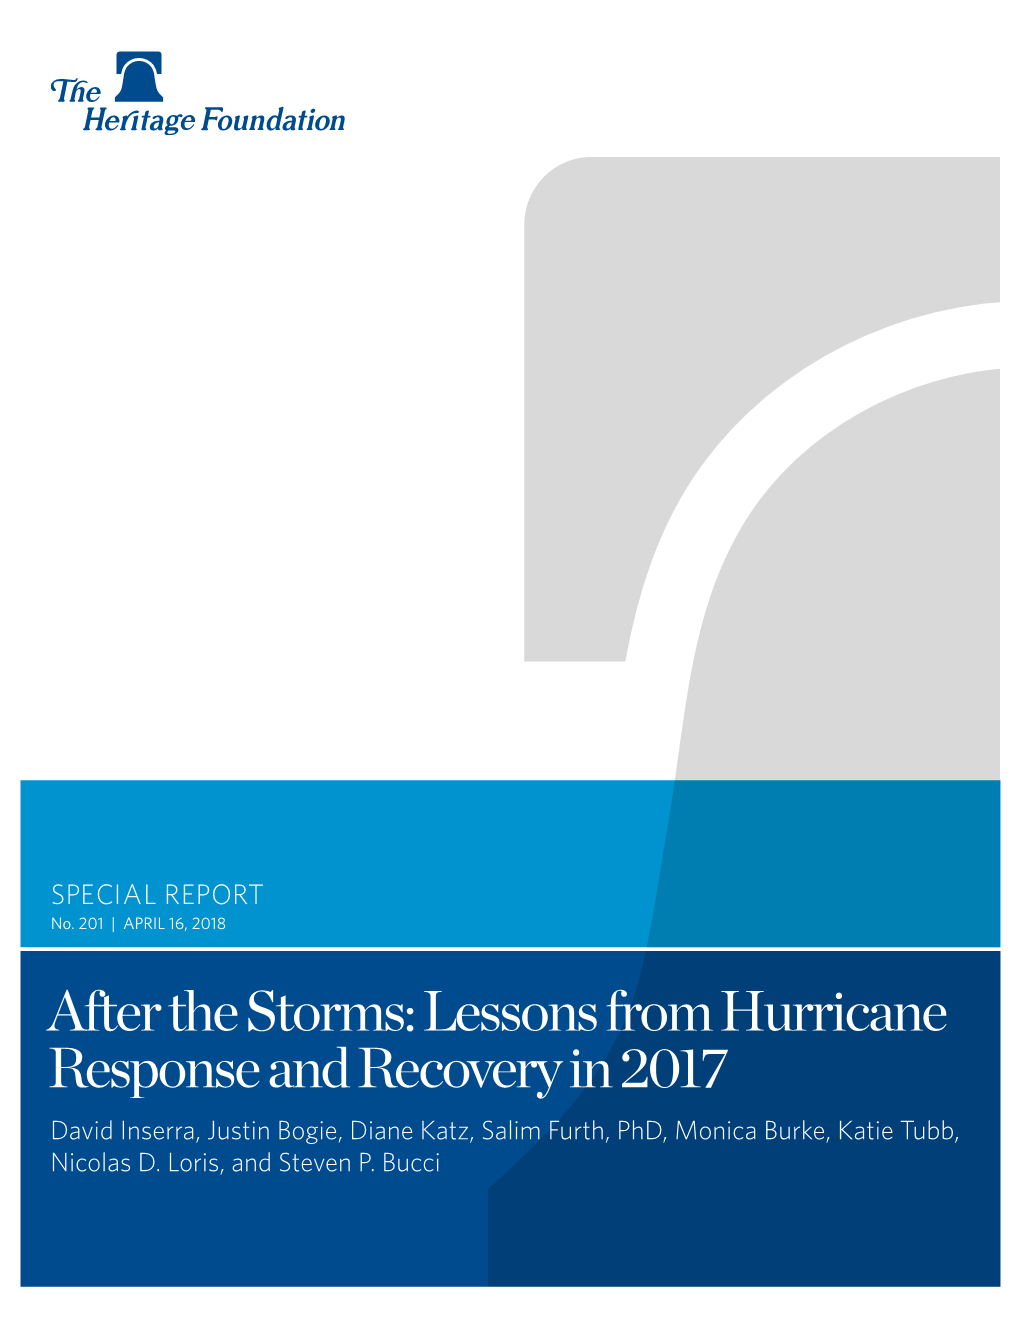 After the Storms: Lessons from Hurricane Response and Recovery in 2017 David Inserra, Justin Bogie, Diane Katz, Salim Furth, Phd, Monica Burke, Katie Tubb, Nicolas D